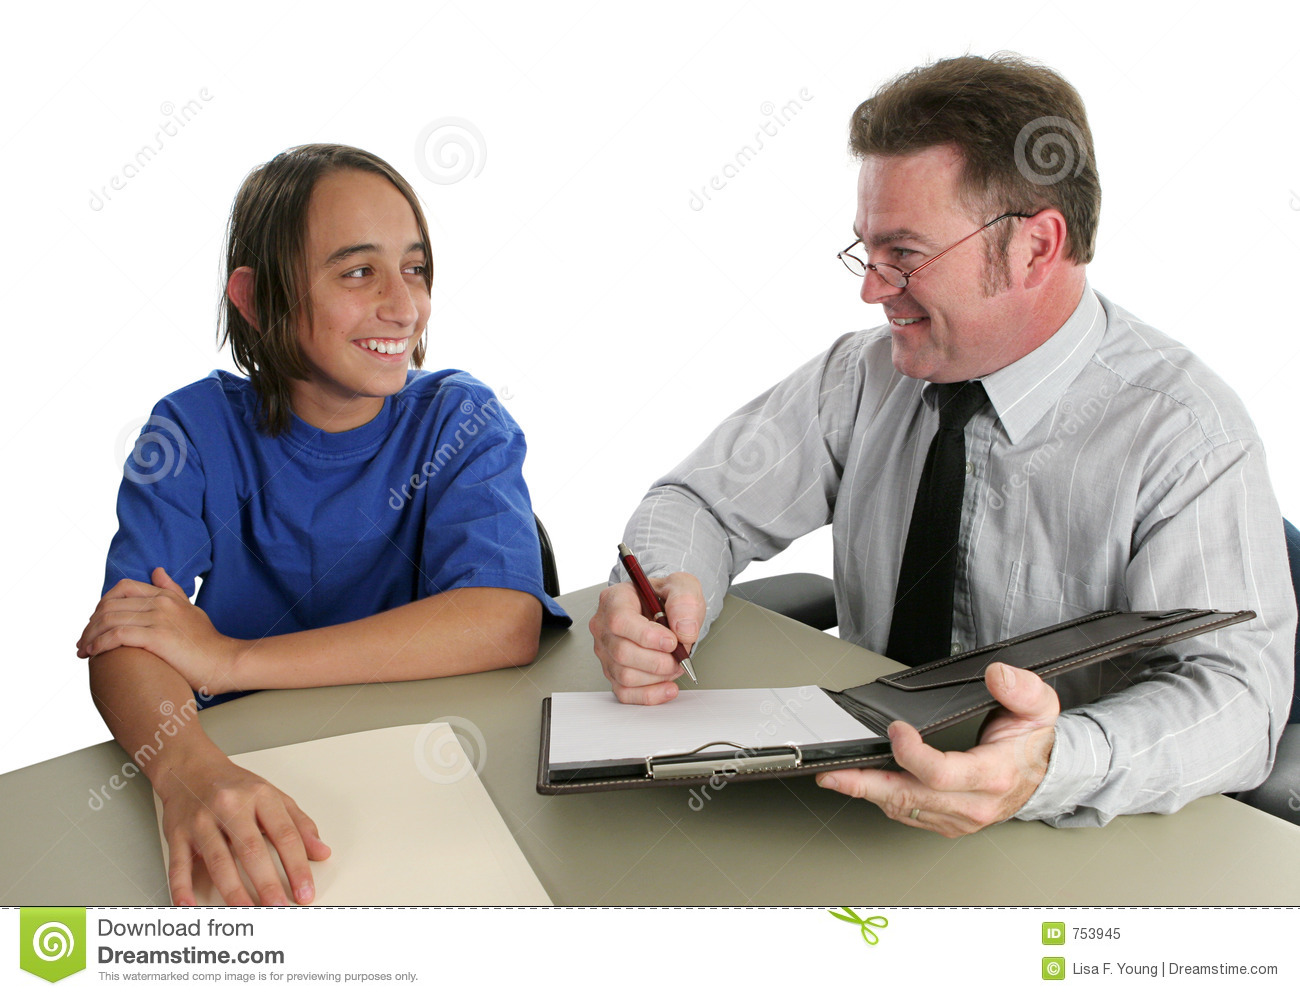 Positive Student Teacher Conference Royalty Free Stock Photo   Image